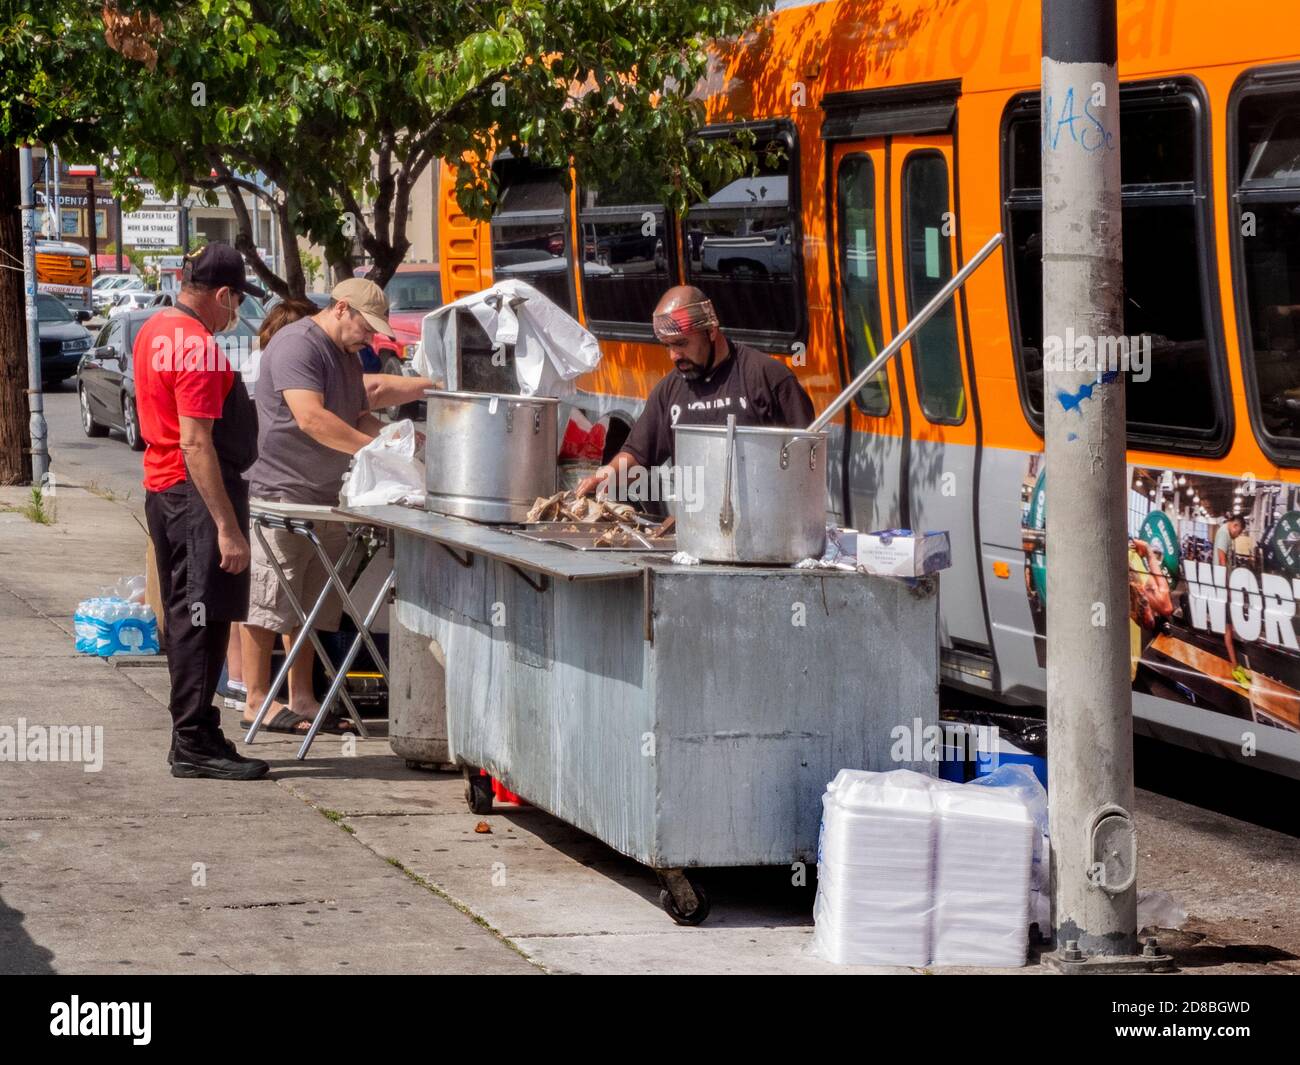 With restaurants closed in the coronavirus pandemic, an enterprising Hispanic chef moves his grill and pots outdoors to the sidewalk by a bus stop in Stock Photo